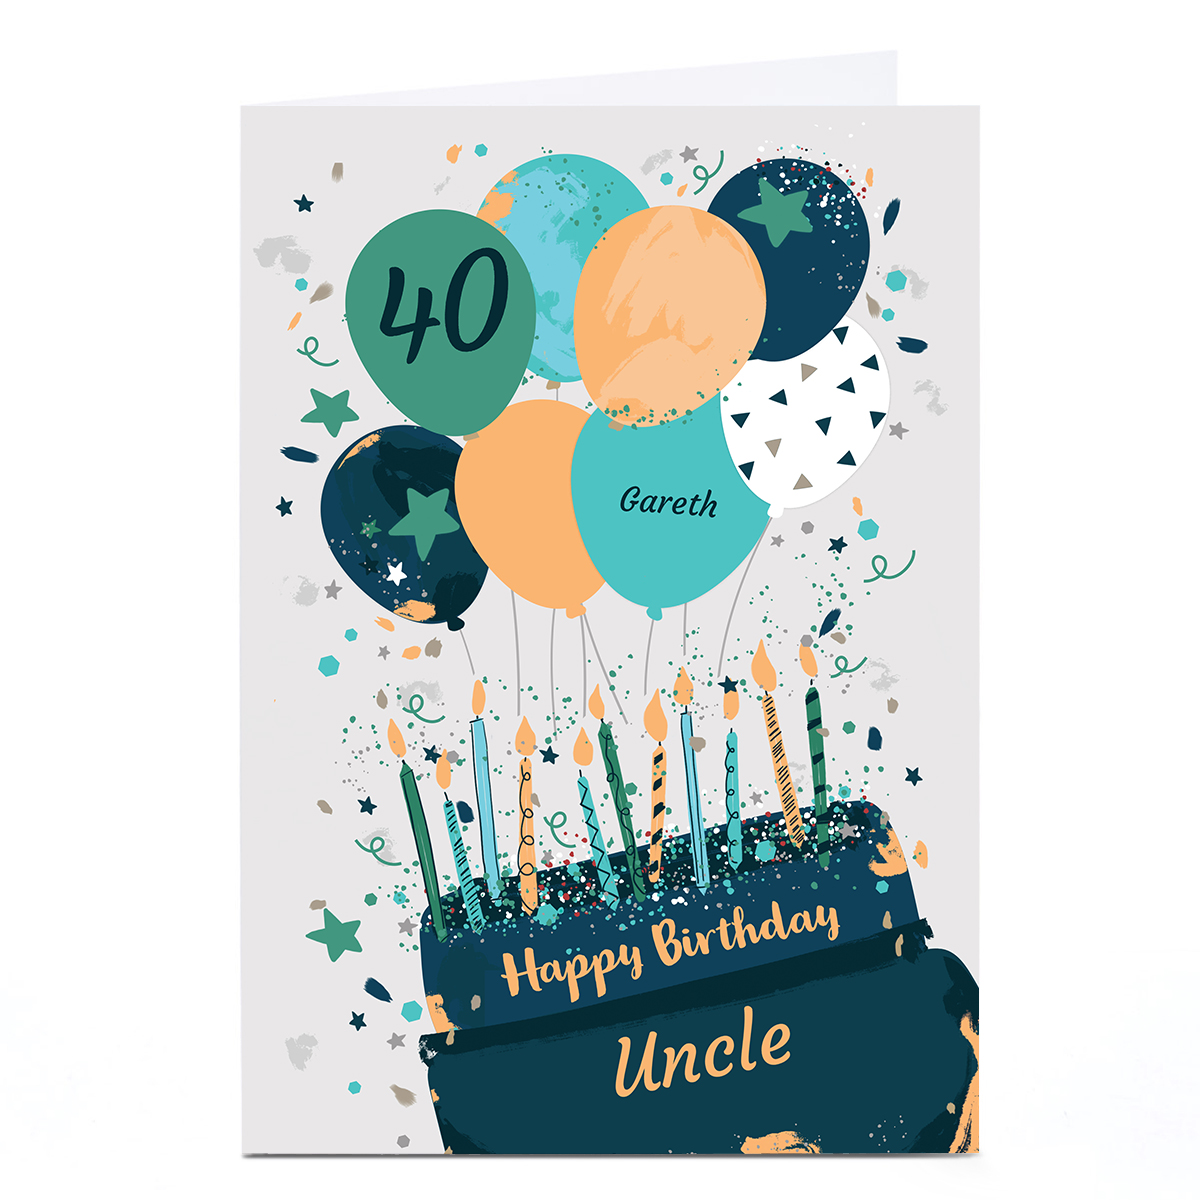 Personalised Birthday Card - Cake & Balloons, Editable Age & Recipient